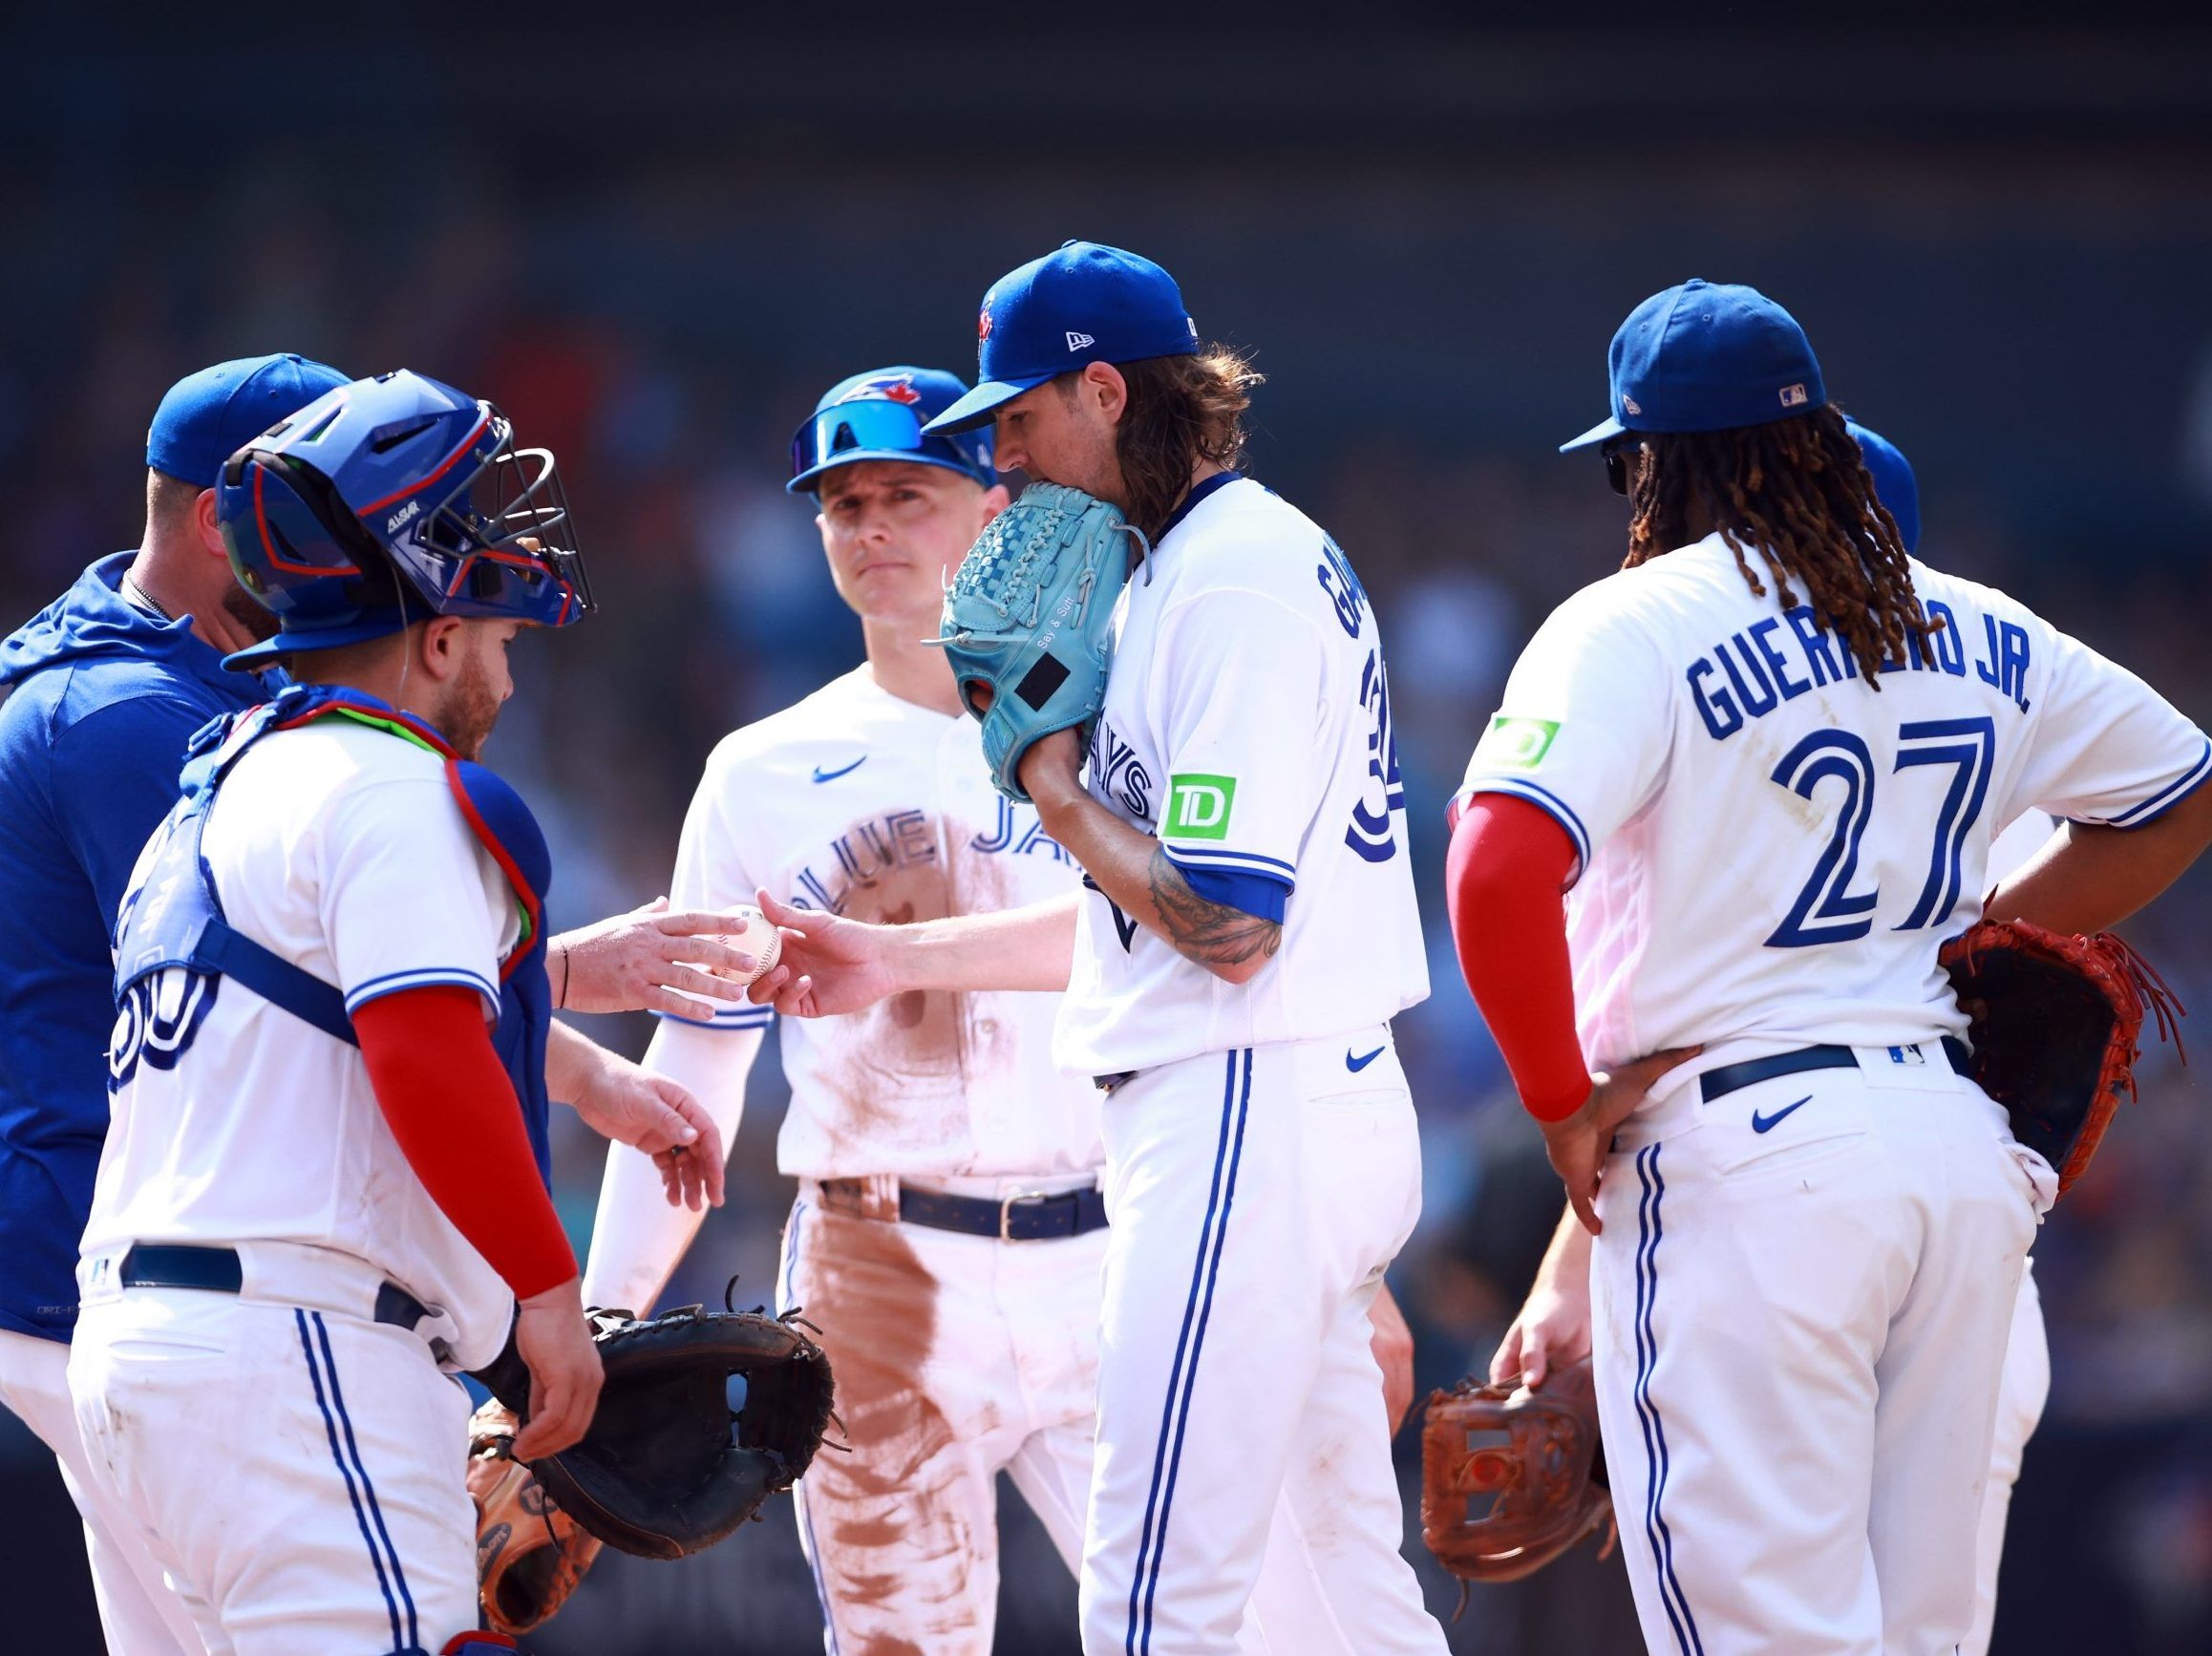 Toronto Blue Jays woeful record against AL East opponents threatens to scuttle playoff hopes